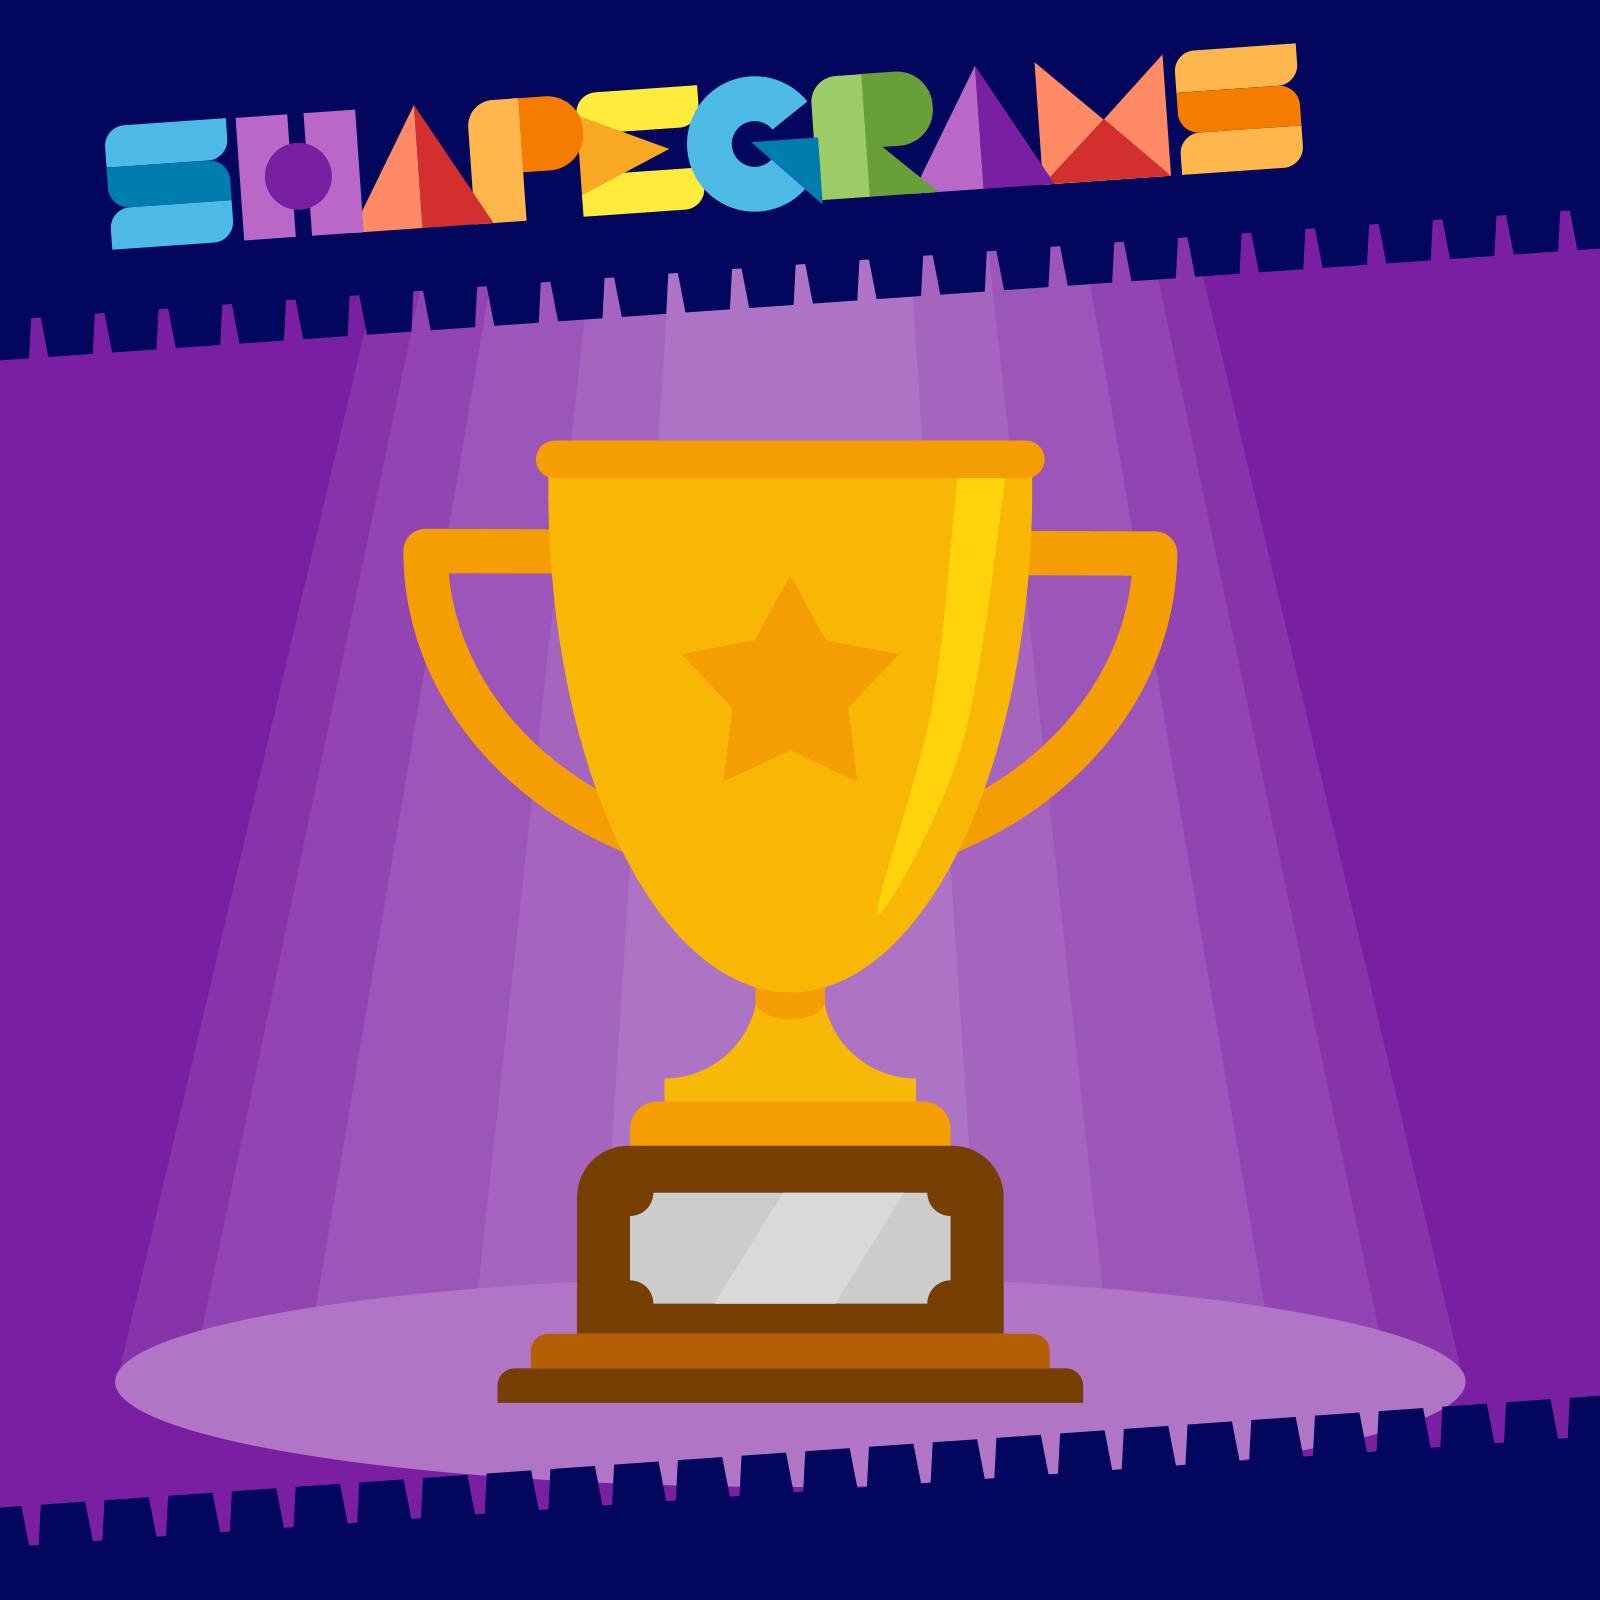 The Trophy Zipper challenge is a golden opportunity to practice skills learned from Shapegrams Lessons. 

Don&rsquo;t worry, the template comes with step-by-step instructions (and teachers can download them as a PDF).

Level = Outstanding Orange
⬜️⬜️